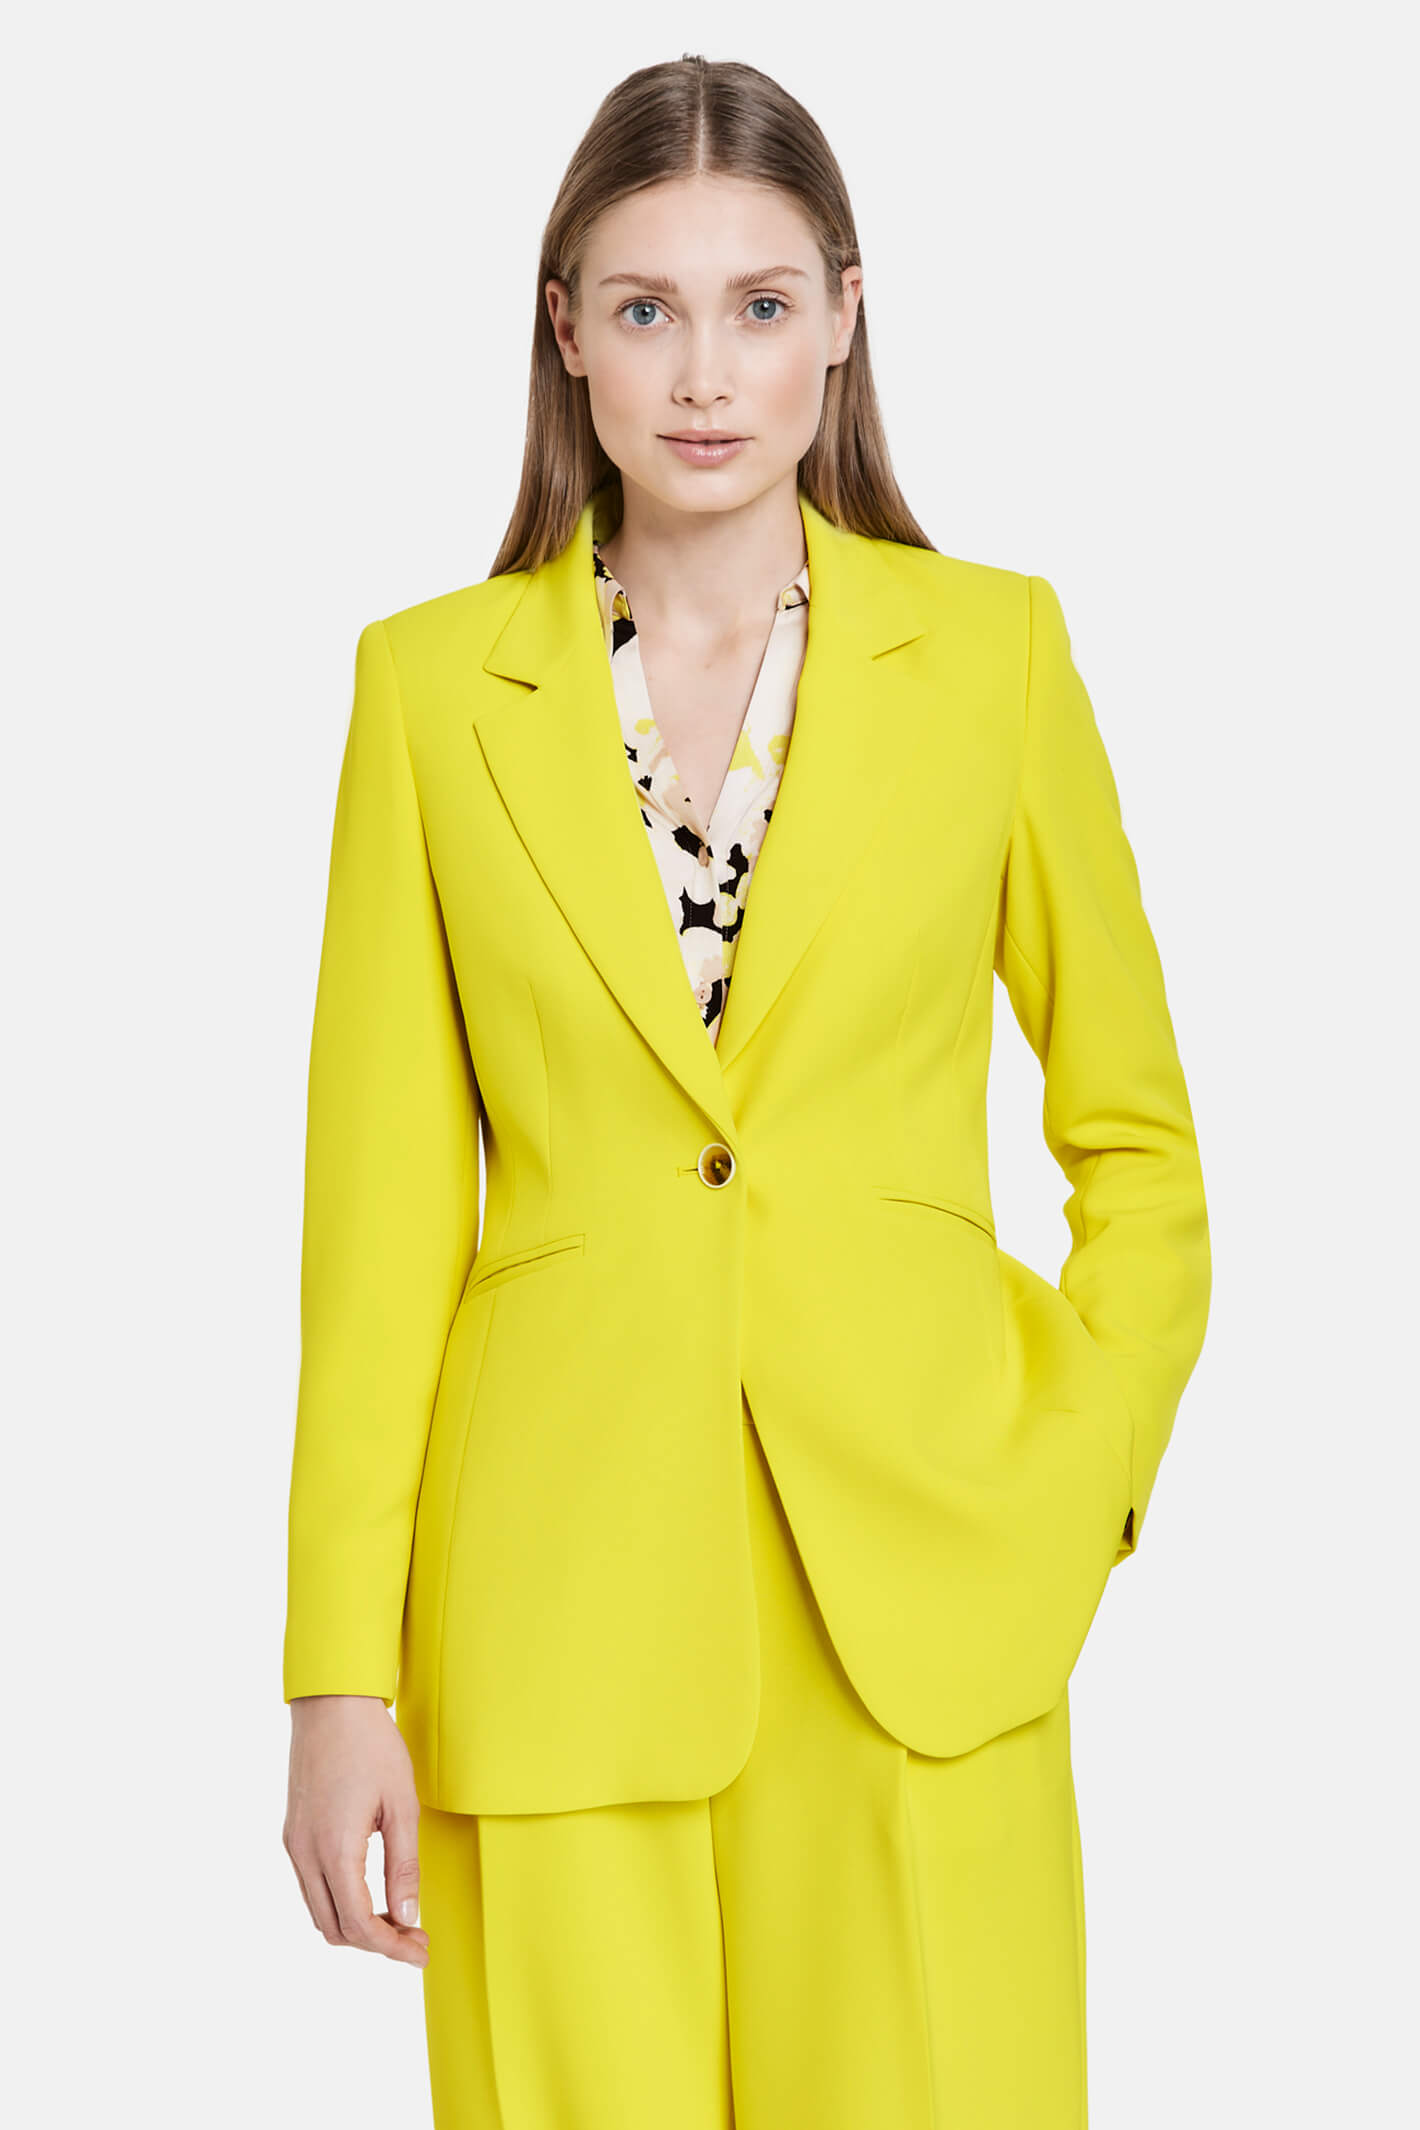 Taifun 330303 Vibrant Lime One Button Jacket – Experience